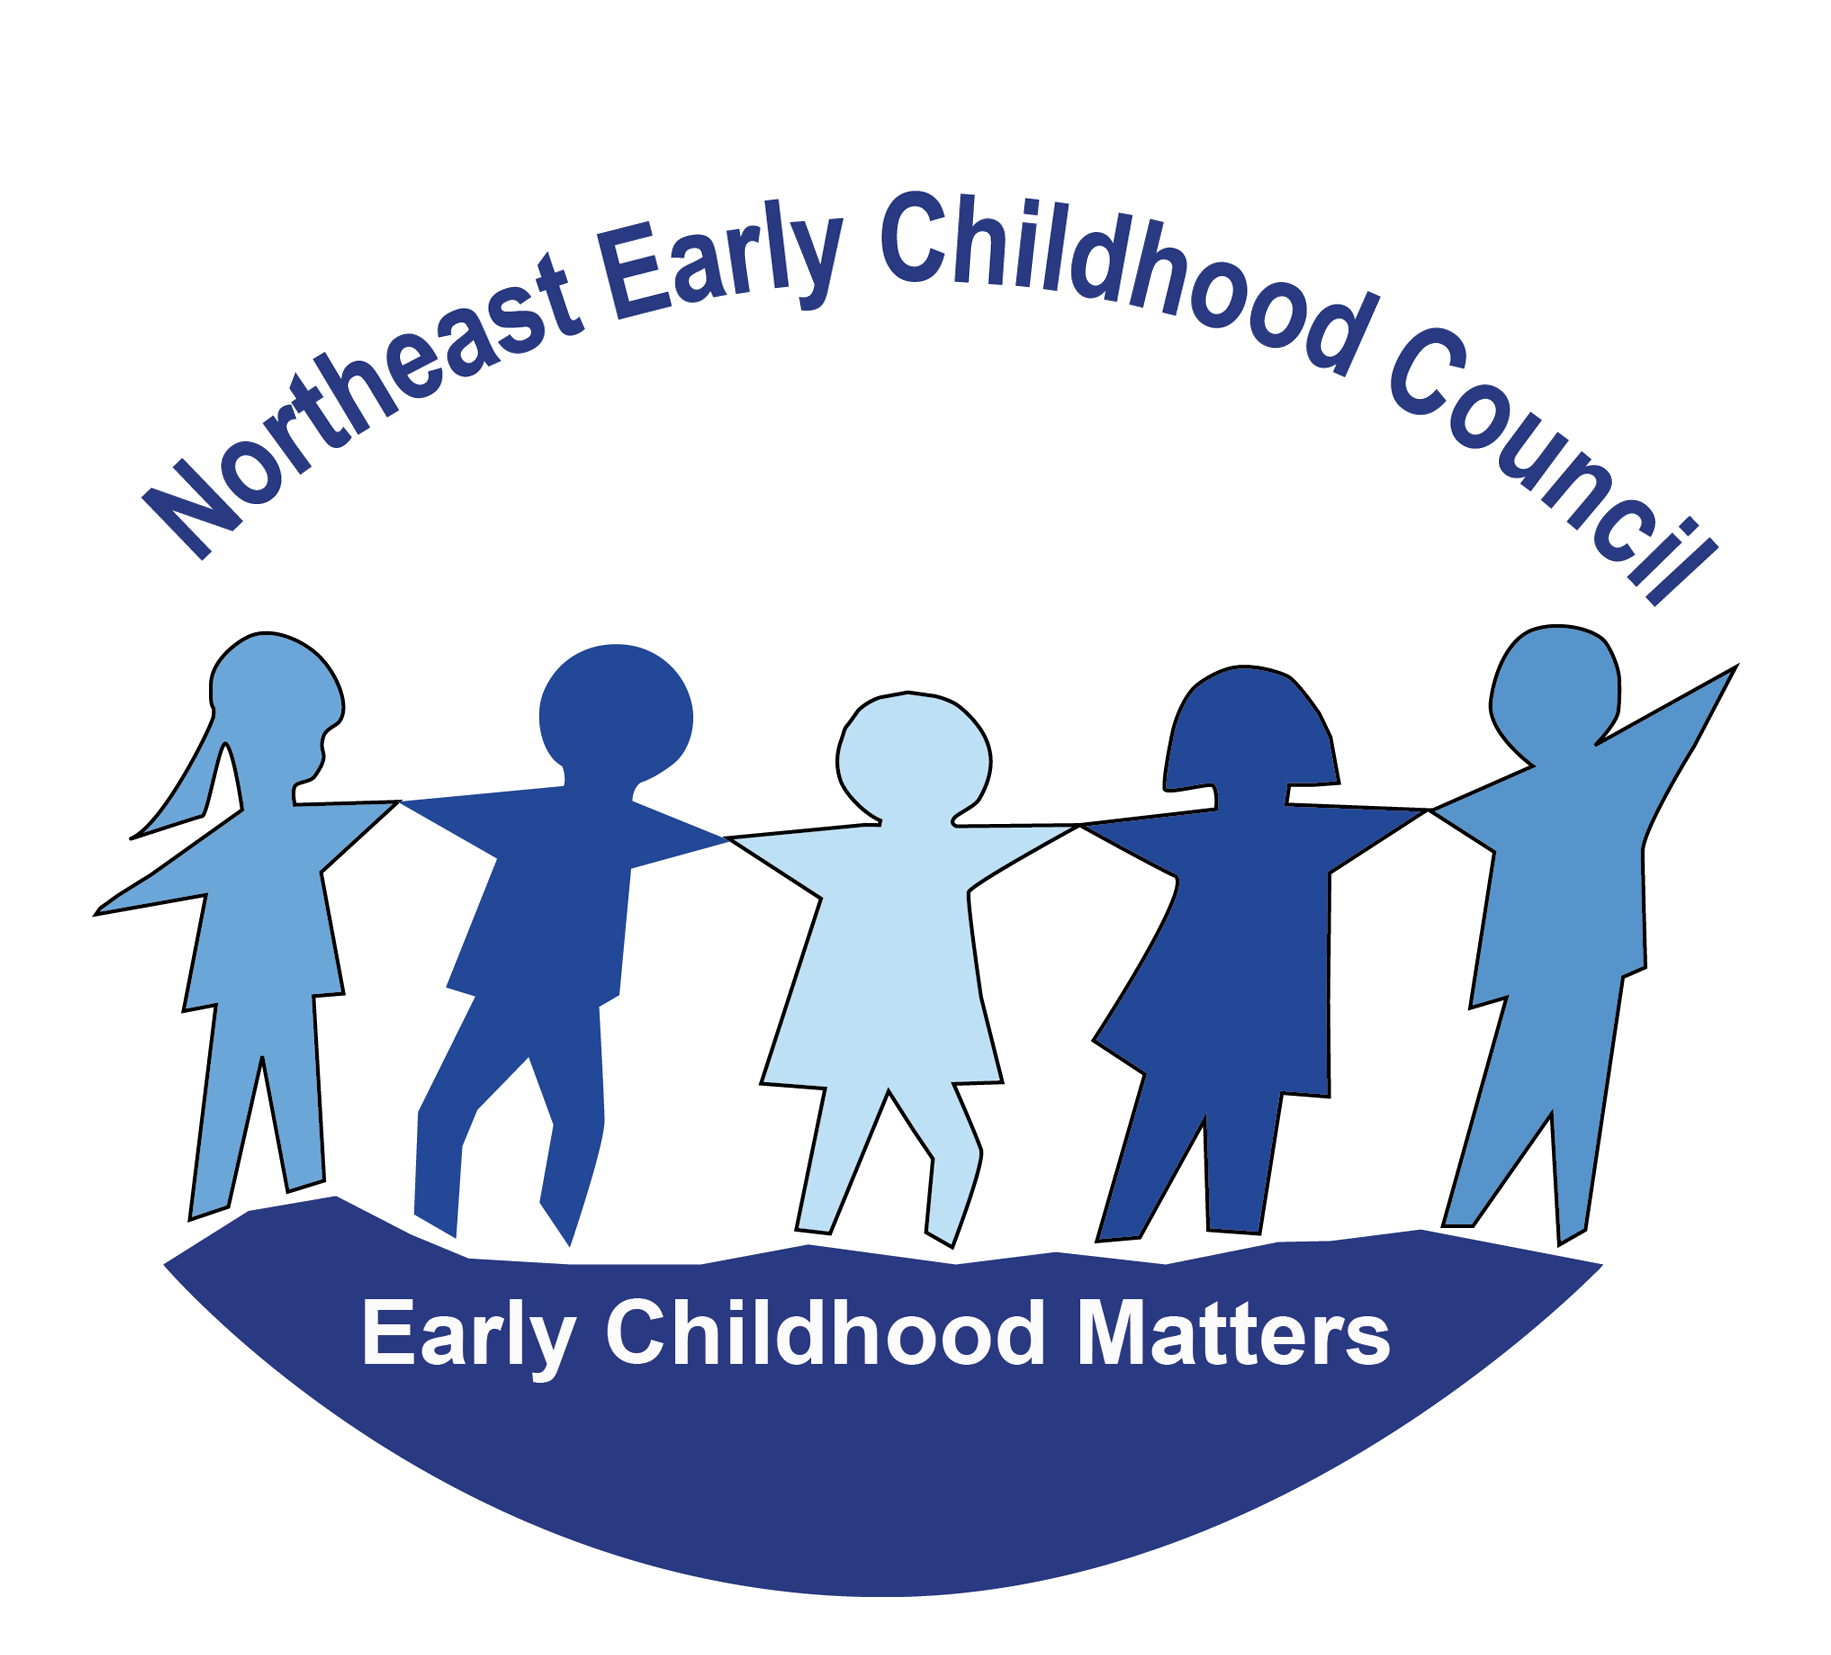 Northeast Early Childhood Council